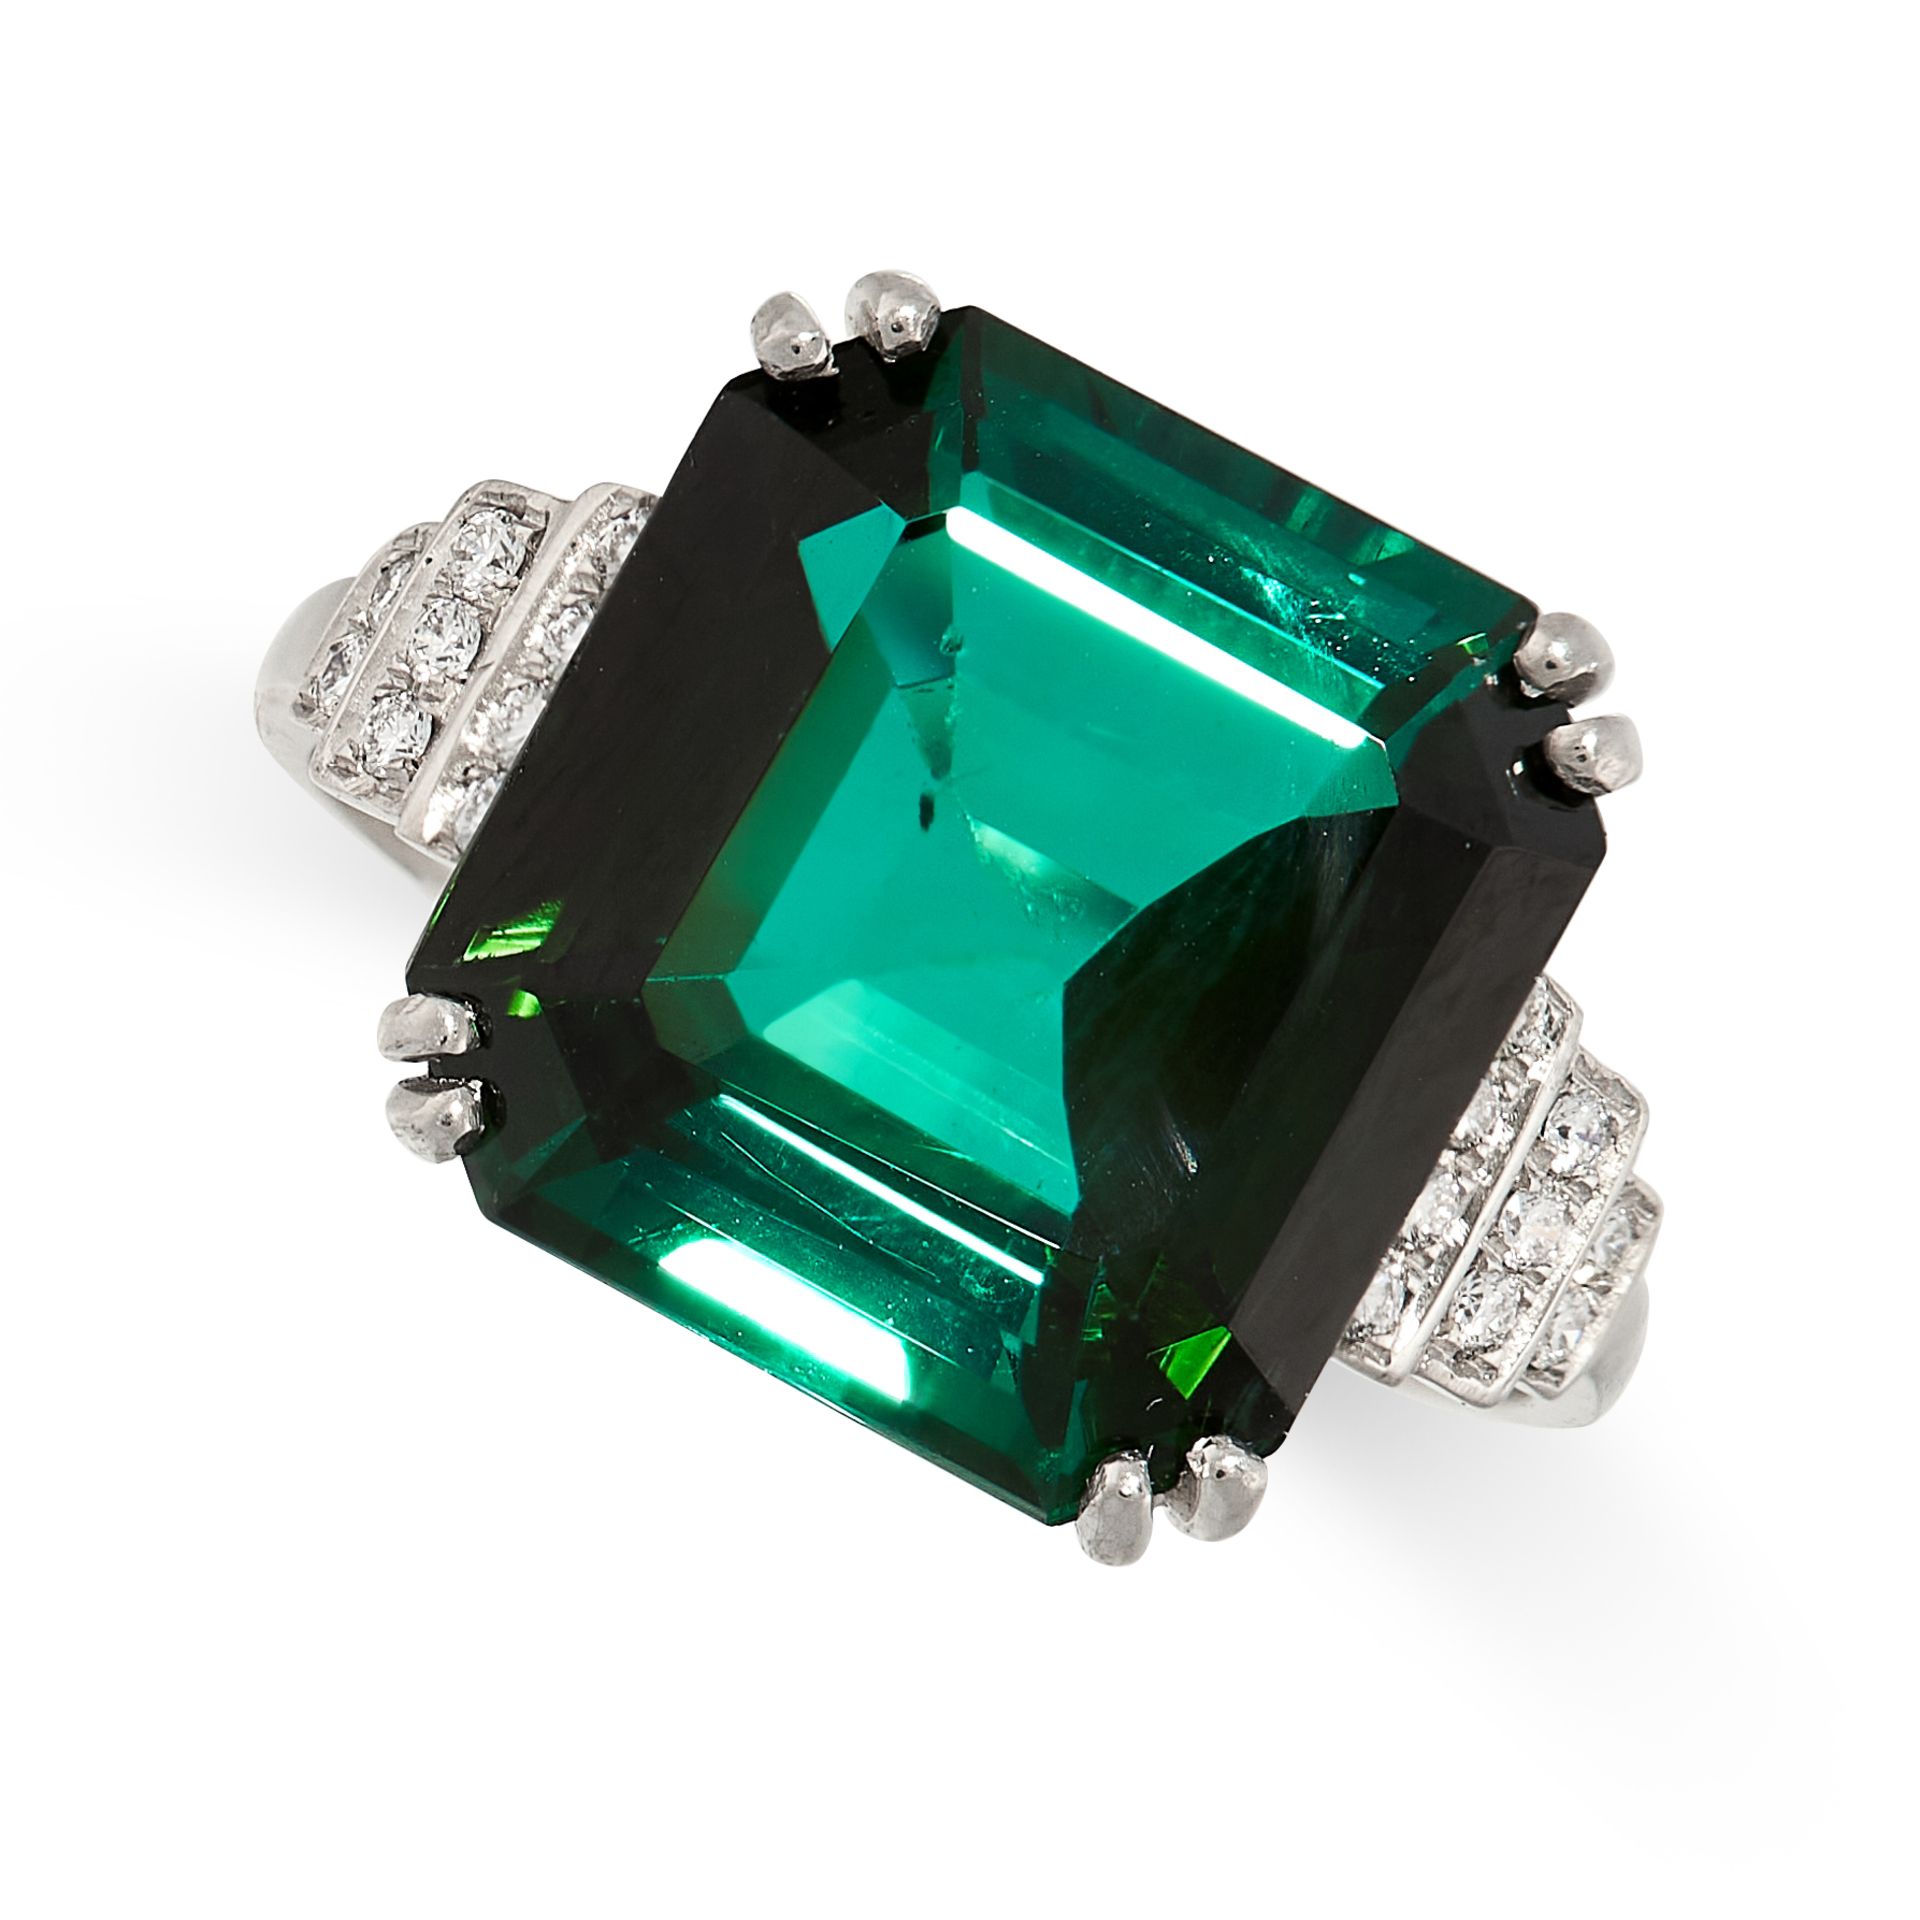 A GREEN TOURMALINE AND DIAMOND RING in 18ct white gold, set with an emerald cut green tourmaline